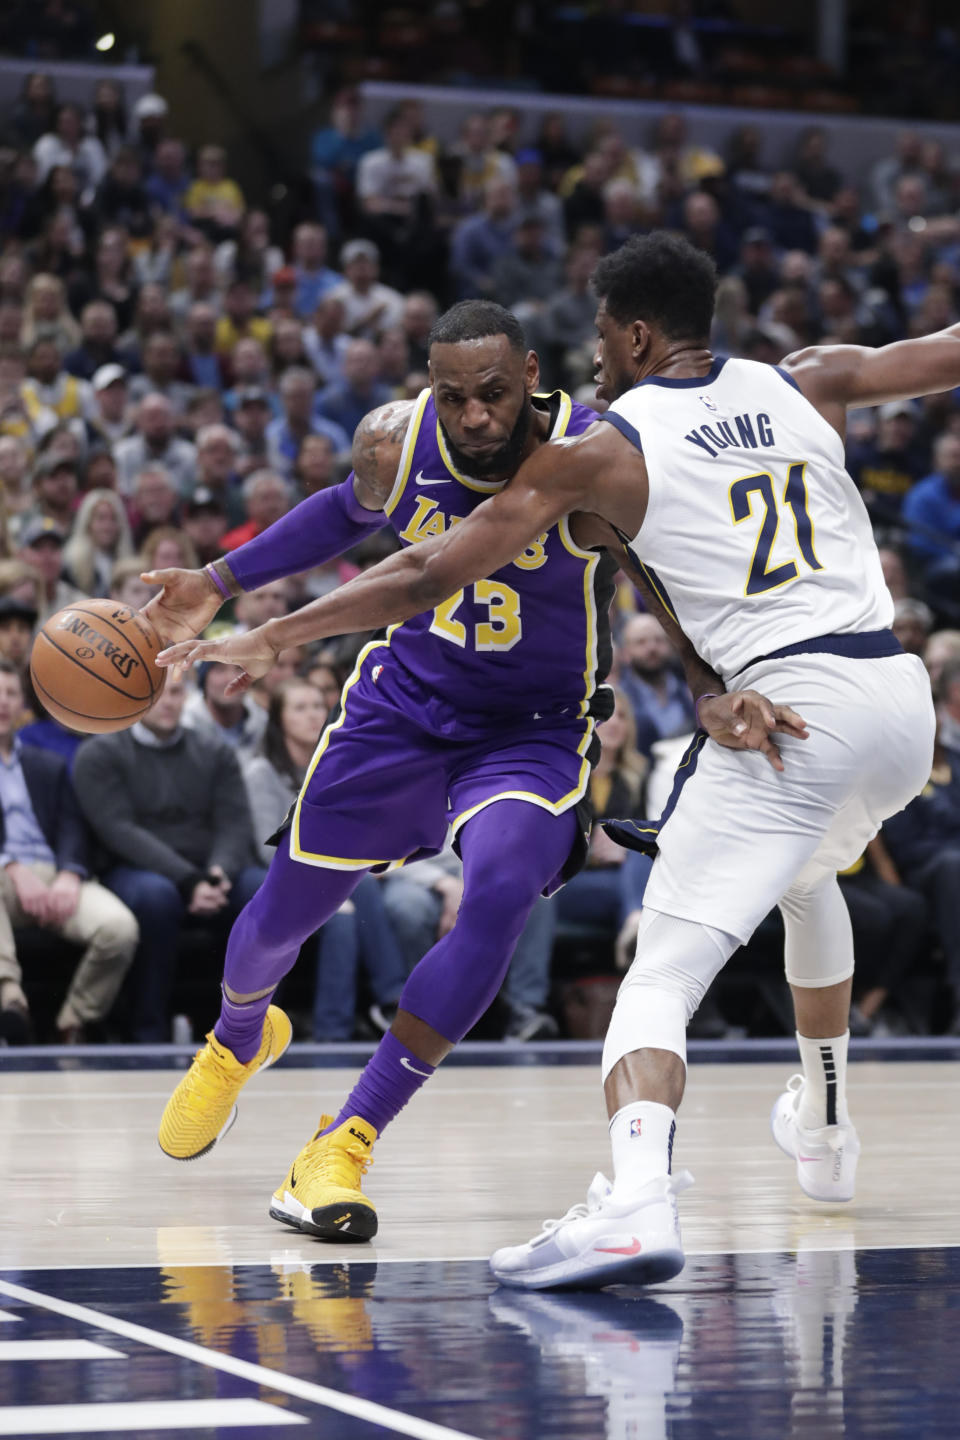 Los Angeles Lakers forward LeBron James (23) drives on Indiana Pacers forward Thaddeus Young (21) during the first half of an NBA basketball game in Indianapolis, Tuesday, Feb. 5, 2019. (AP Photo/Michael Conroy)